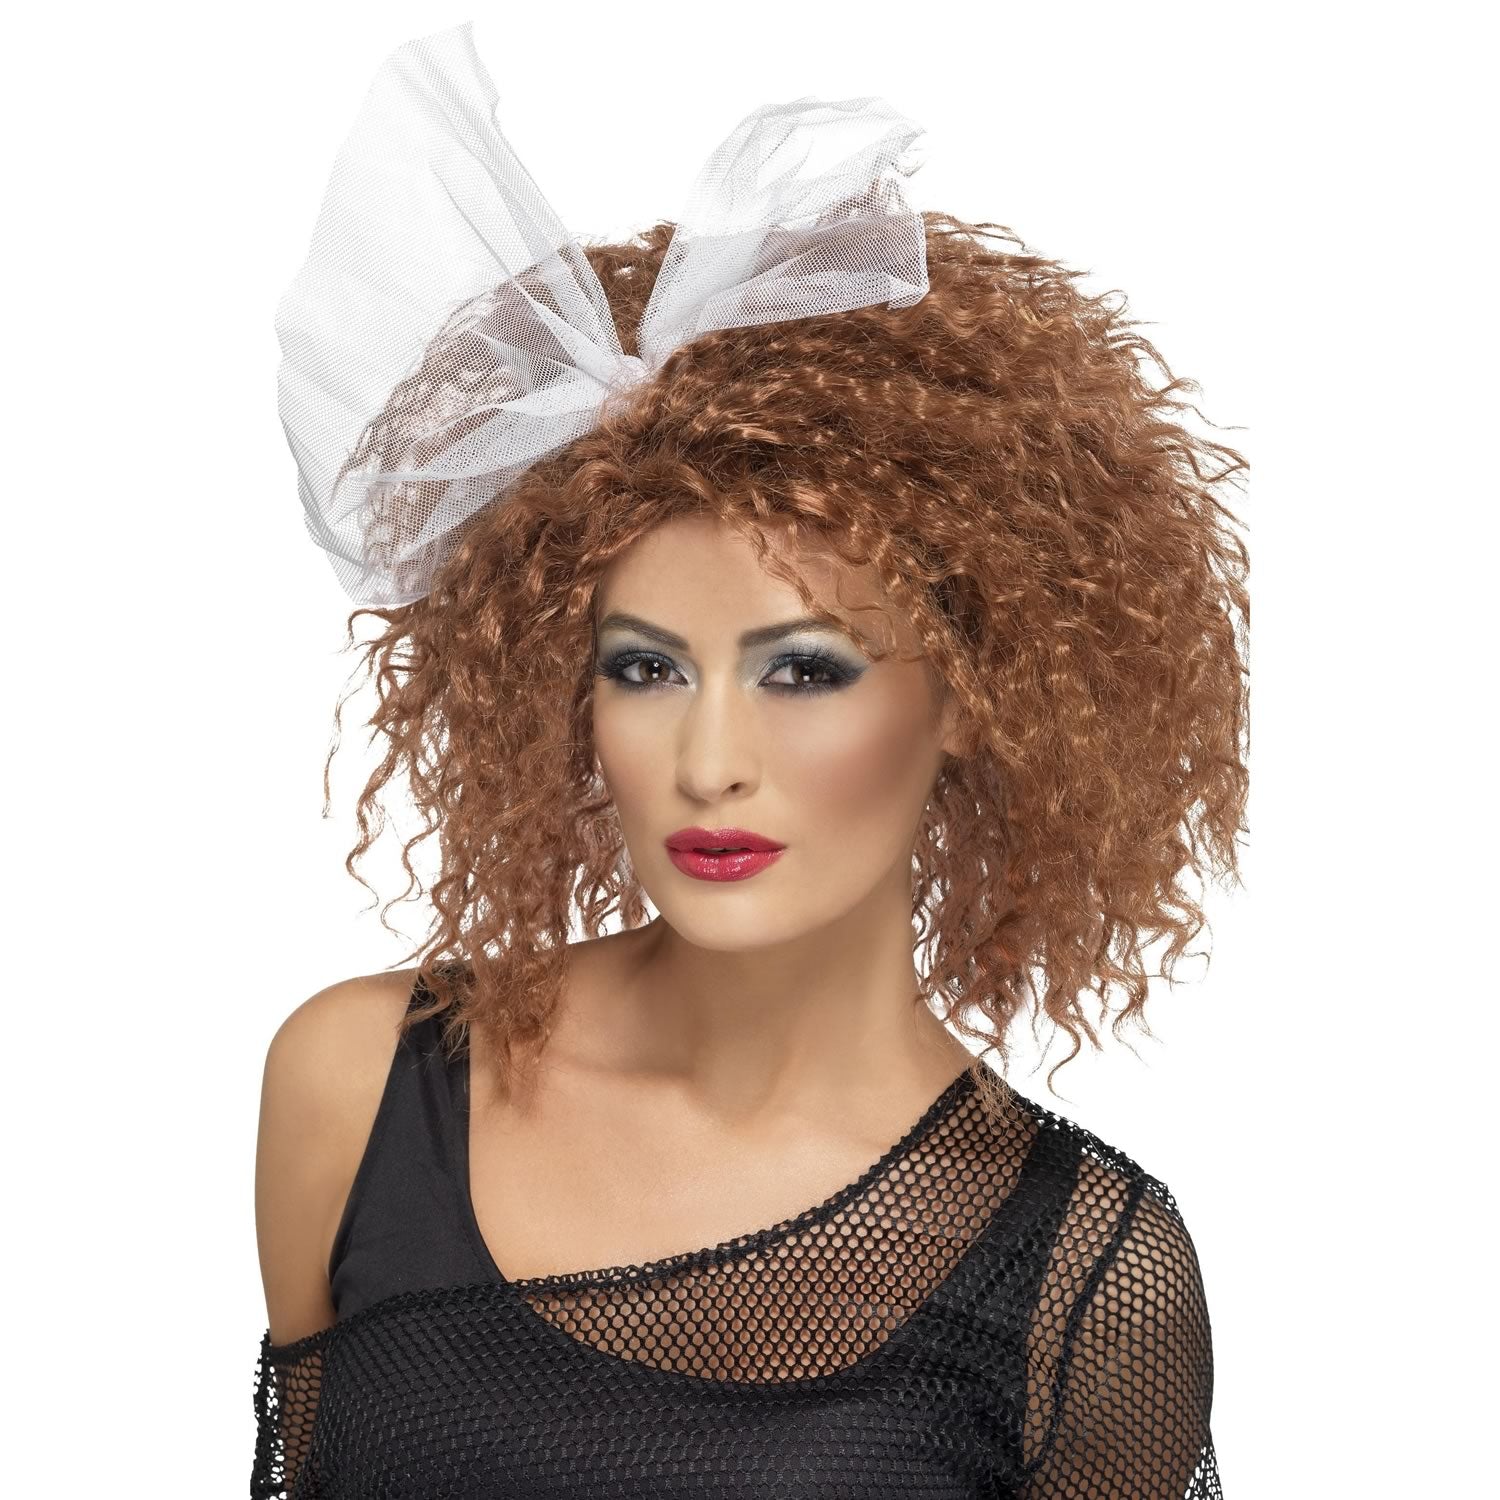 Brown wavy Madonna style wig with large white mesh bow